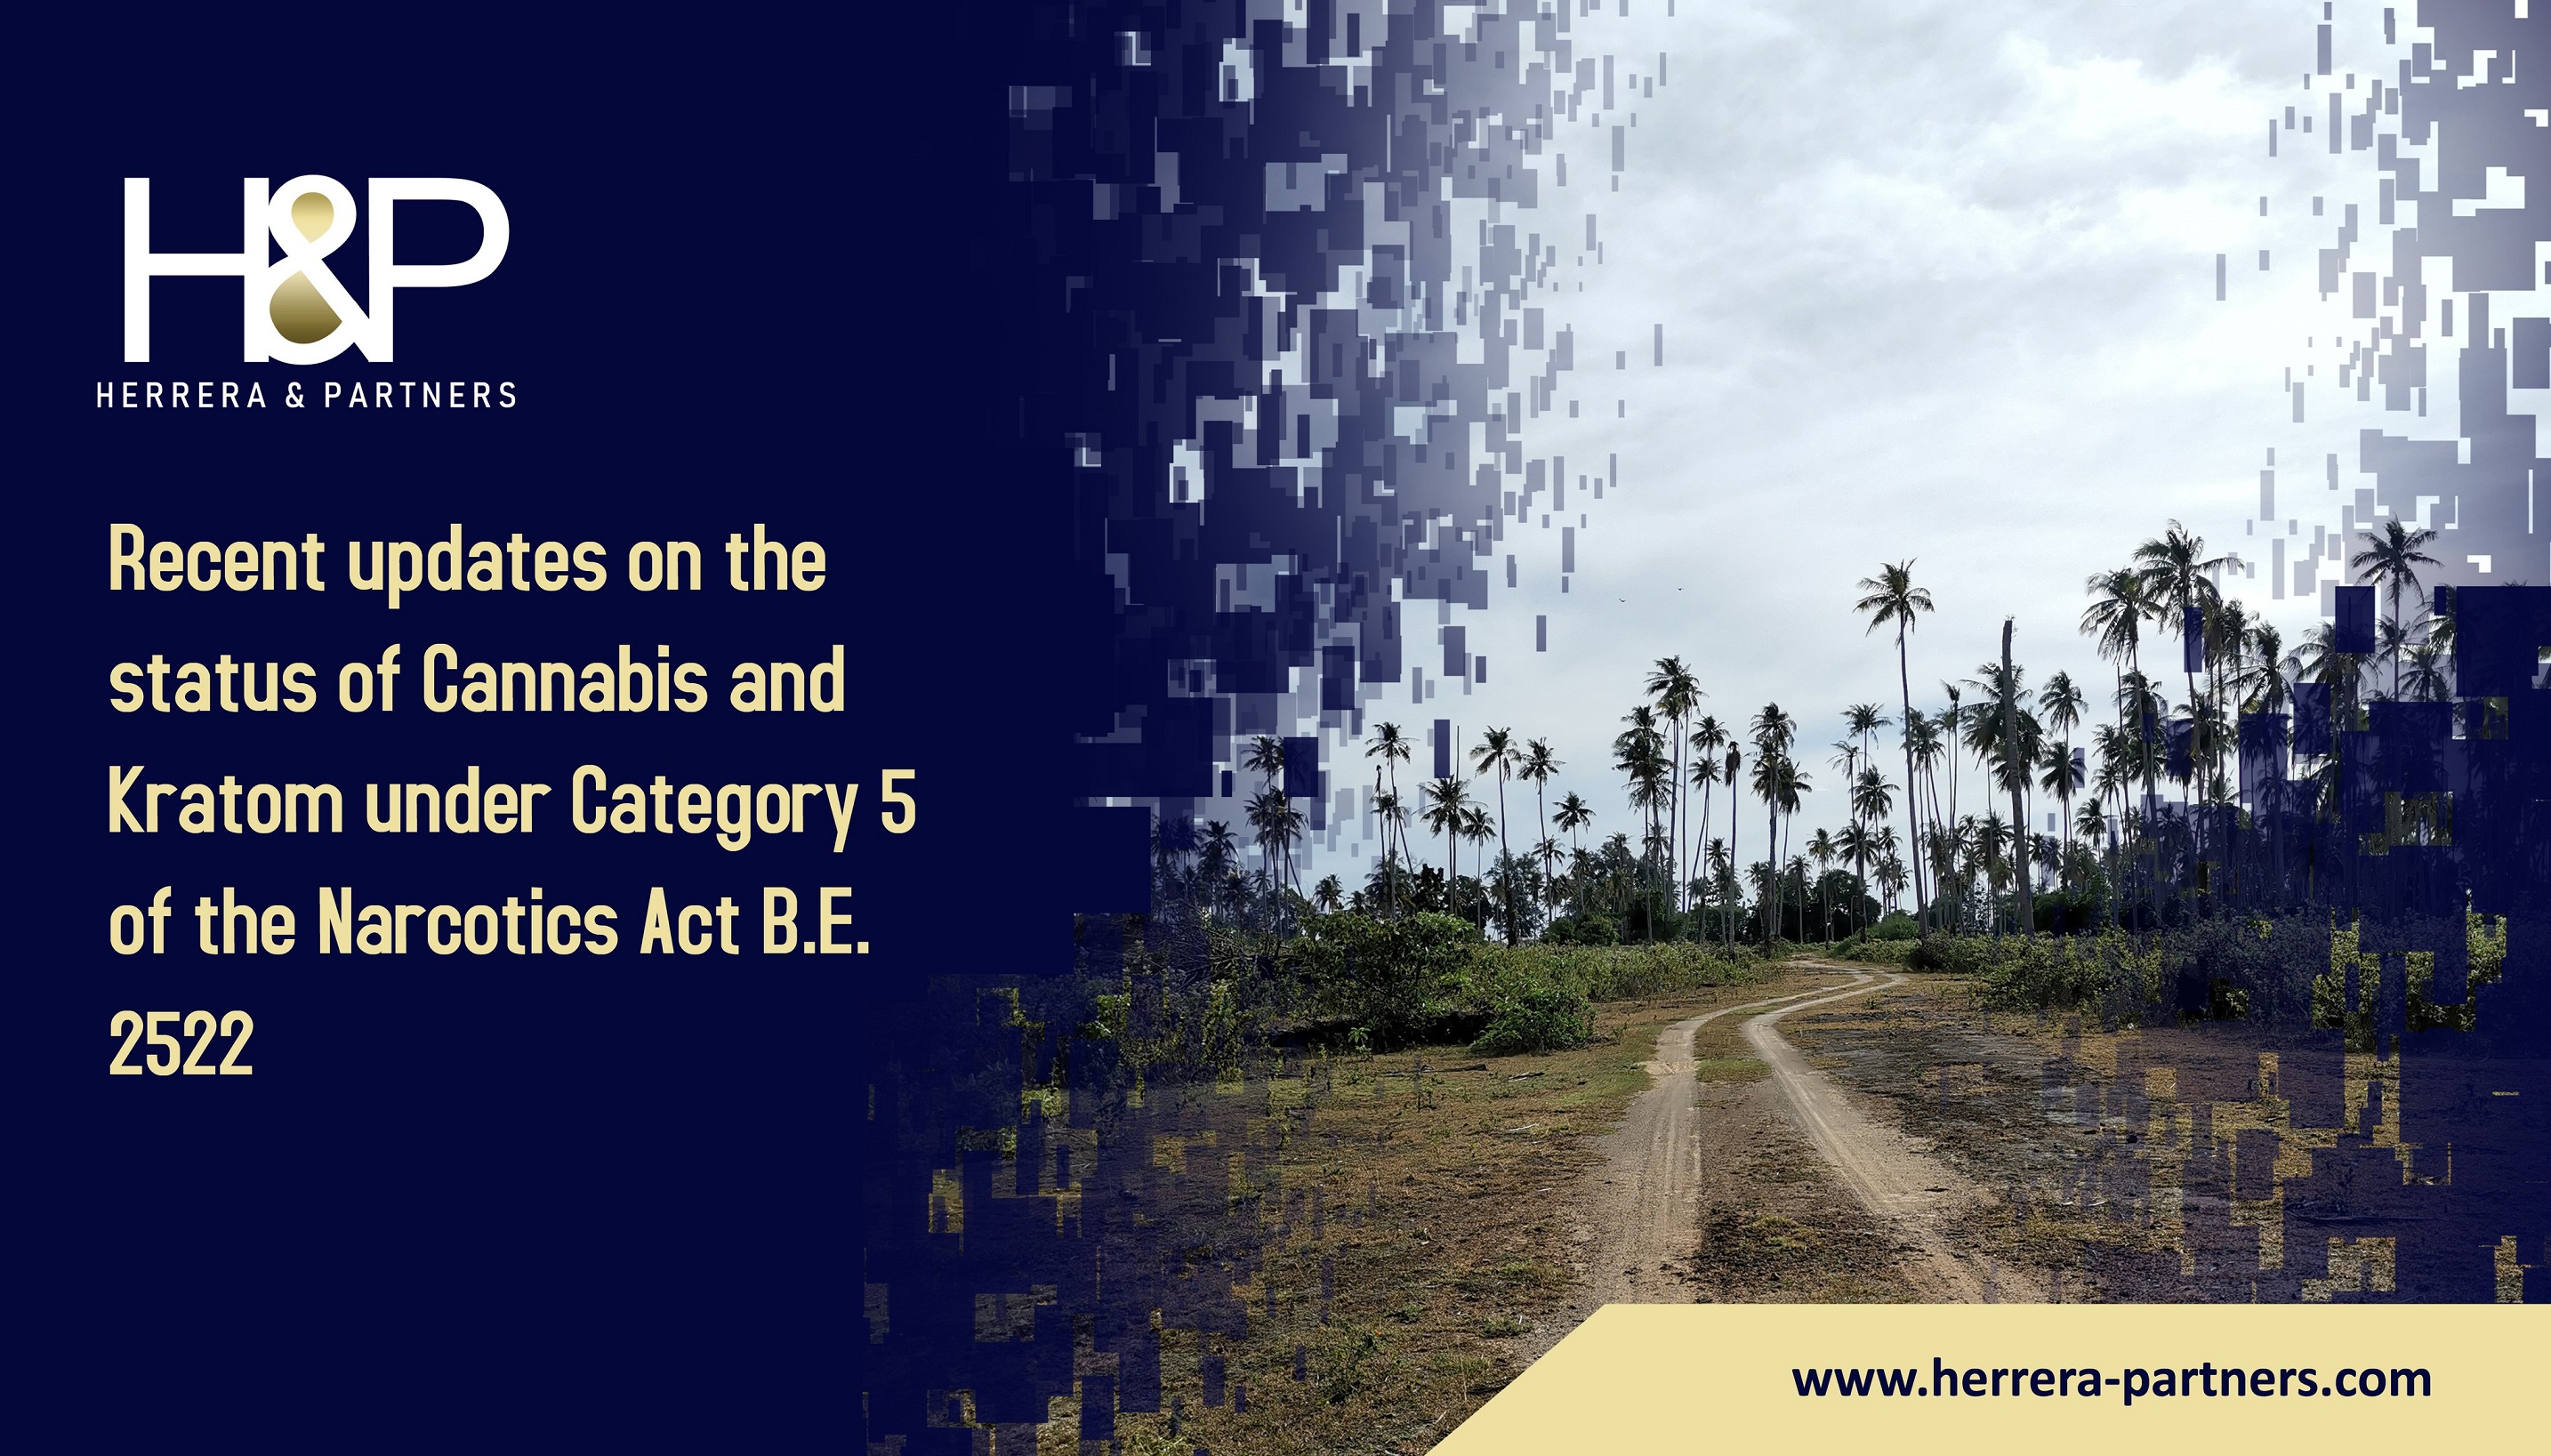 Recent updates on the status of Cannabis and Kratom under Category 5 of the Narcotics Act B.E. 2522 H&P Attorneys in Thailand